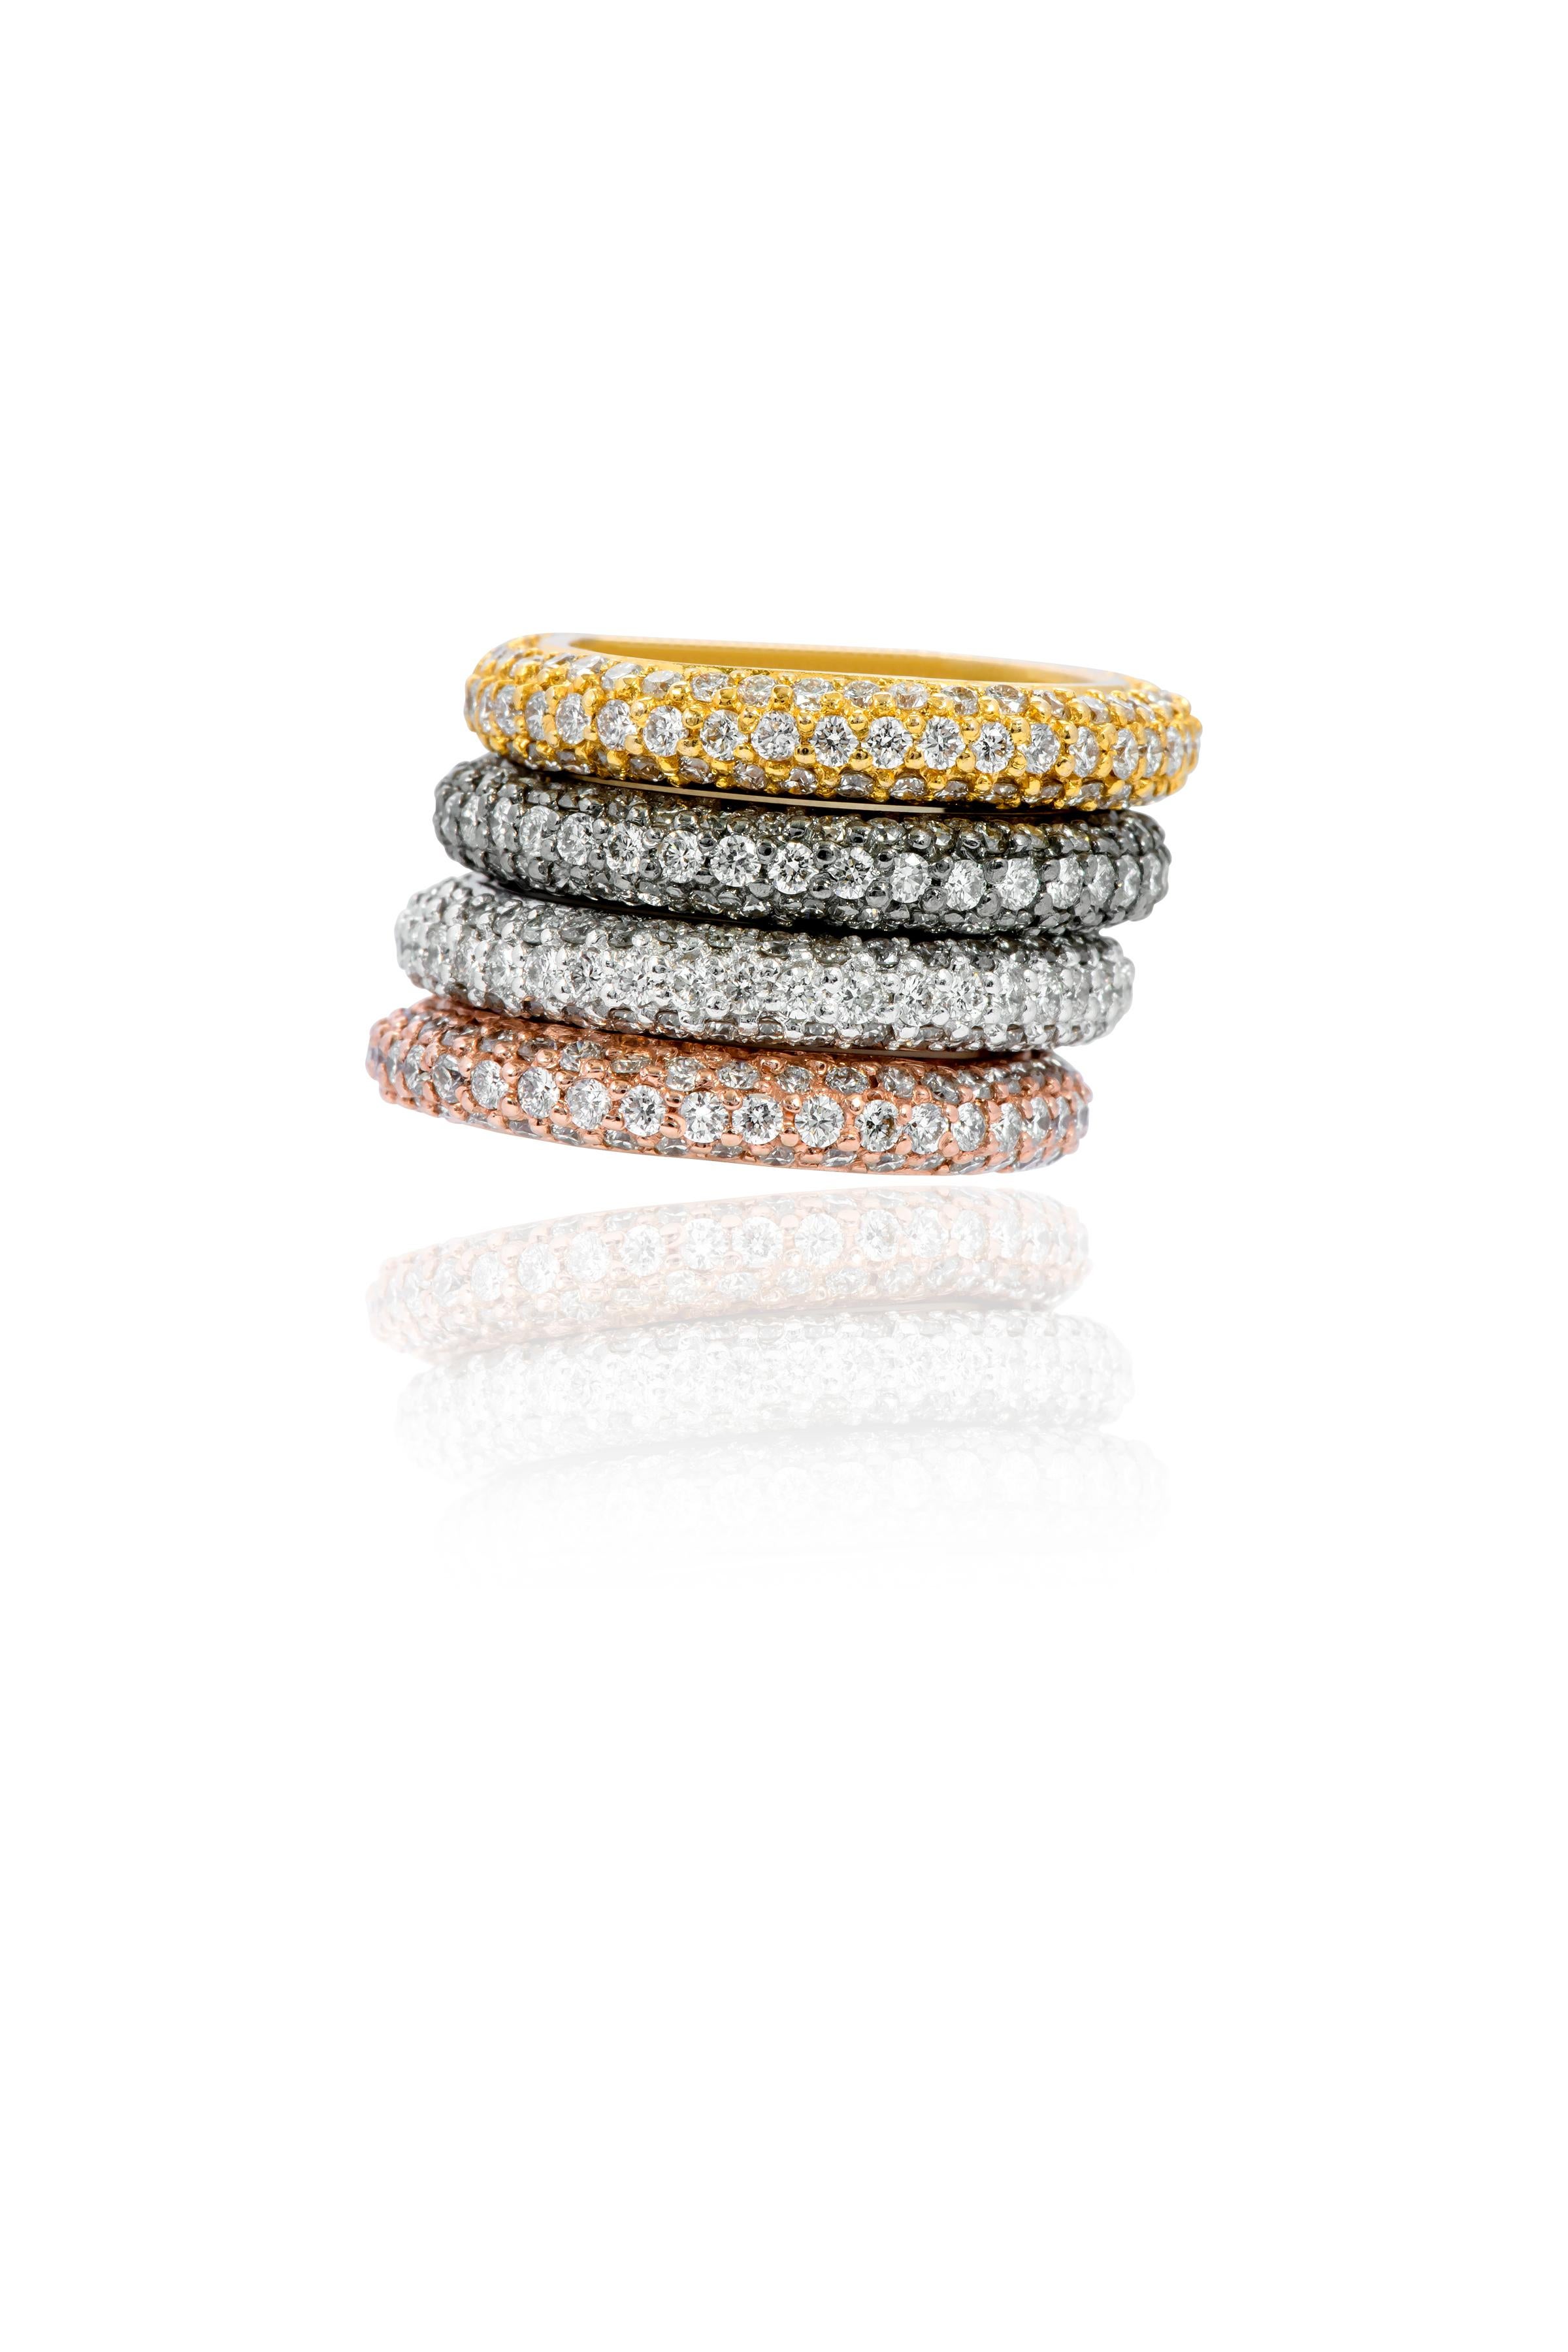 18 Karat Gold 6.90 Carat Diamond Brilliant-Cut Eternity Ring in Four Gold Colors

These phenomenal three row pave set 4 identical diamond bands are beautiful. They’re the classic pave set round diamond band with three leveled rows highlighting each